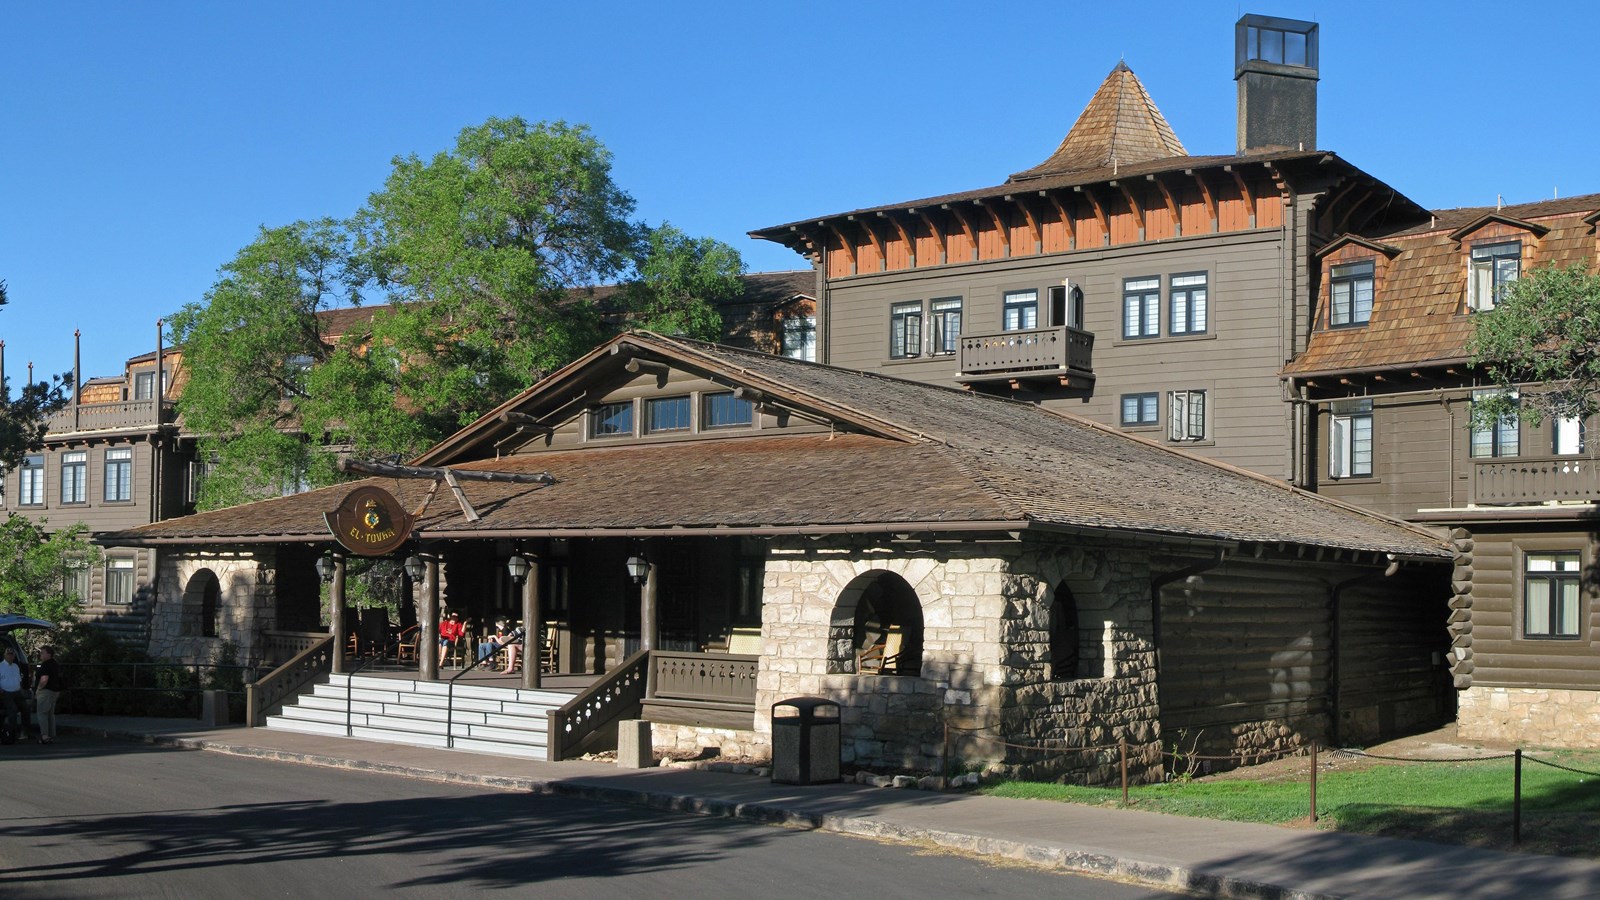 A large, multi-story wooden building features a tall turret and a wide, covered front porch.